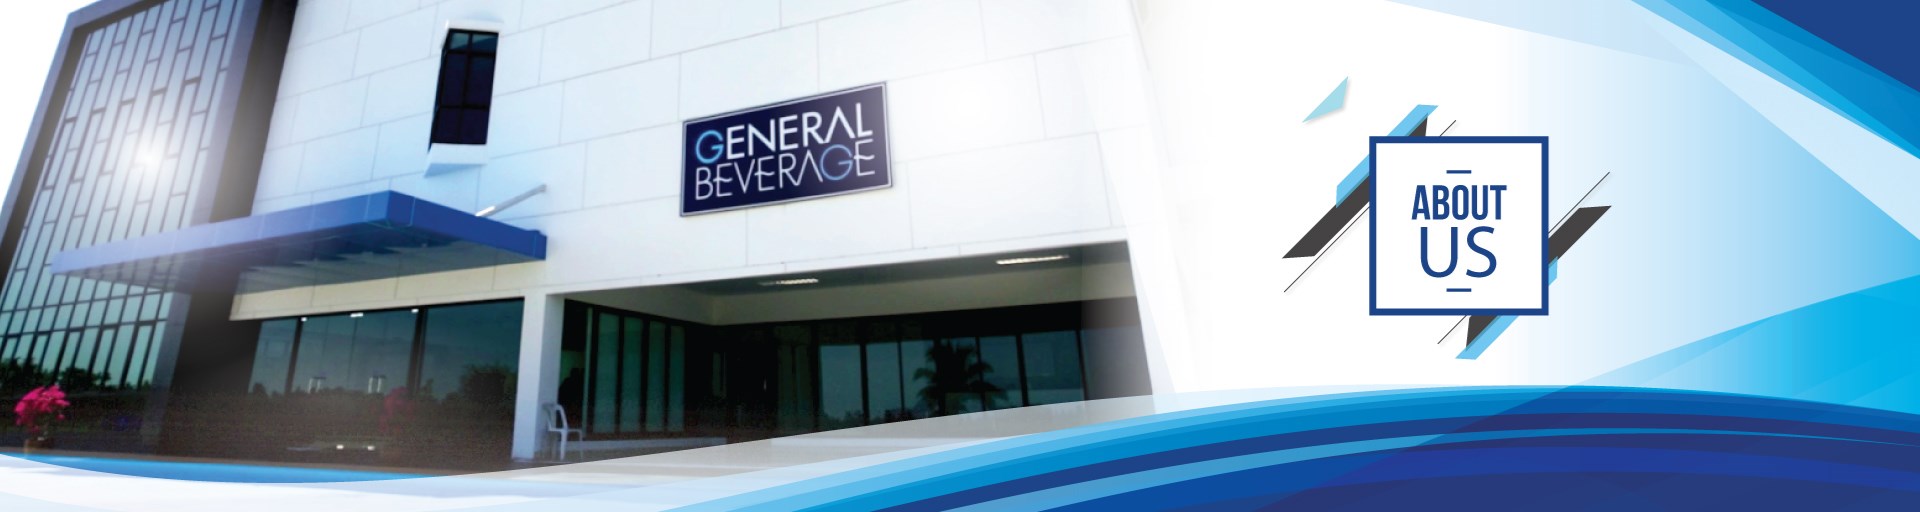 General Beverage - About Us